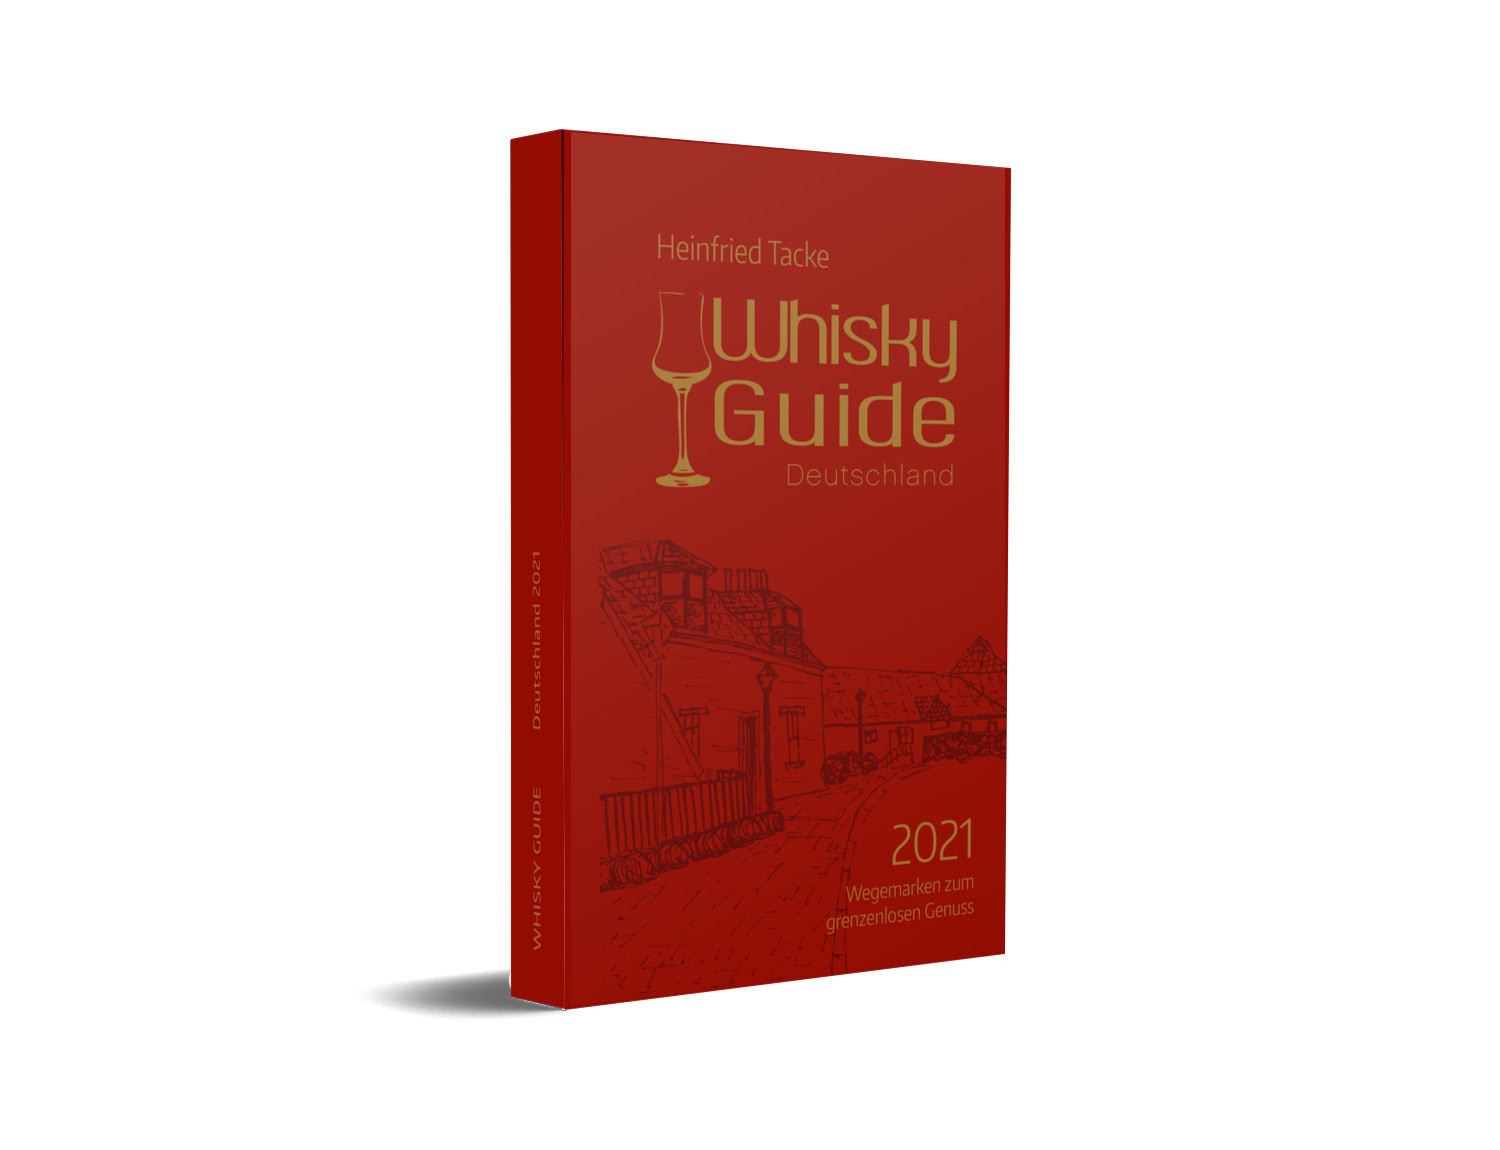 WhiskyGuide 2021